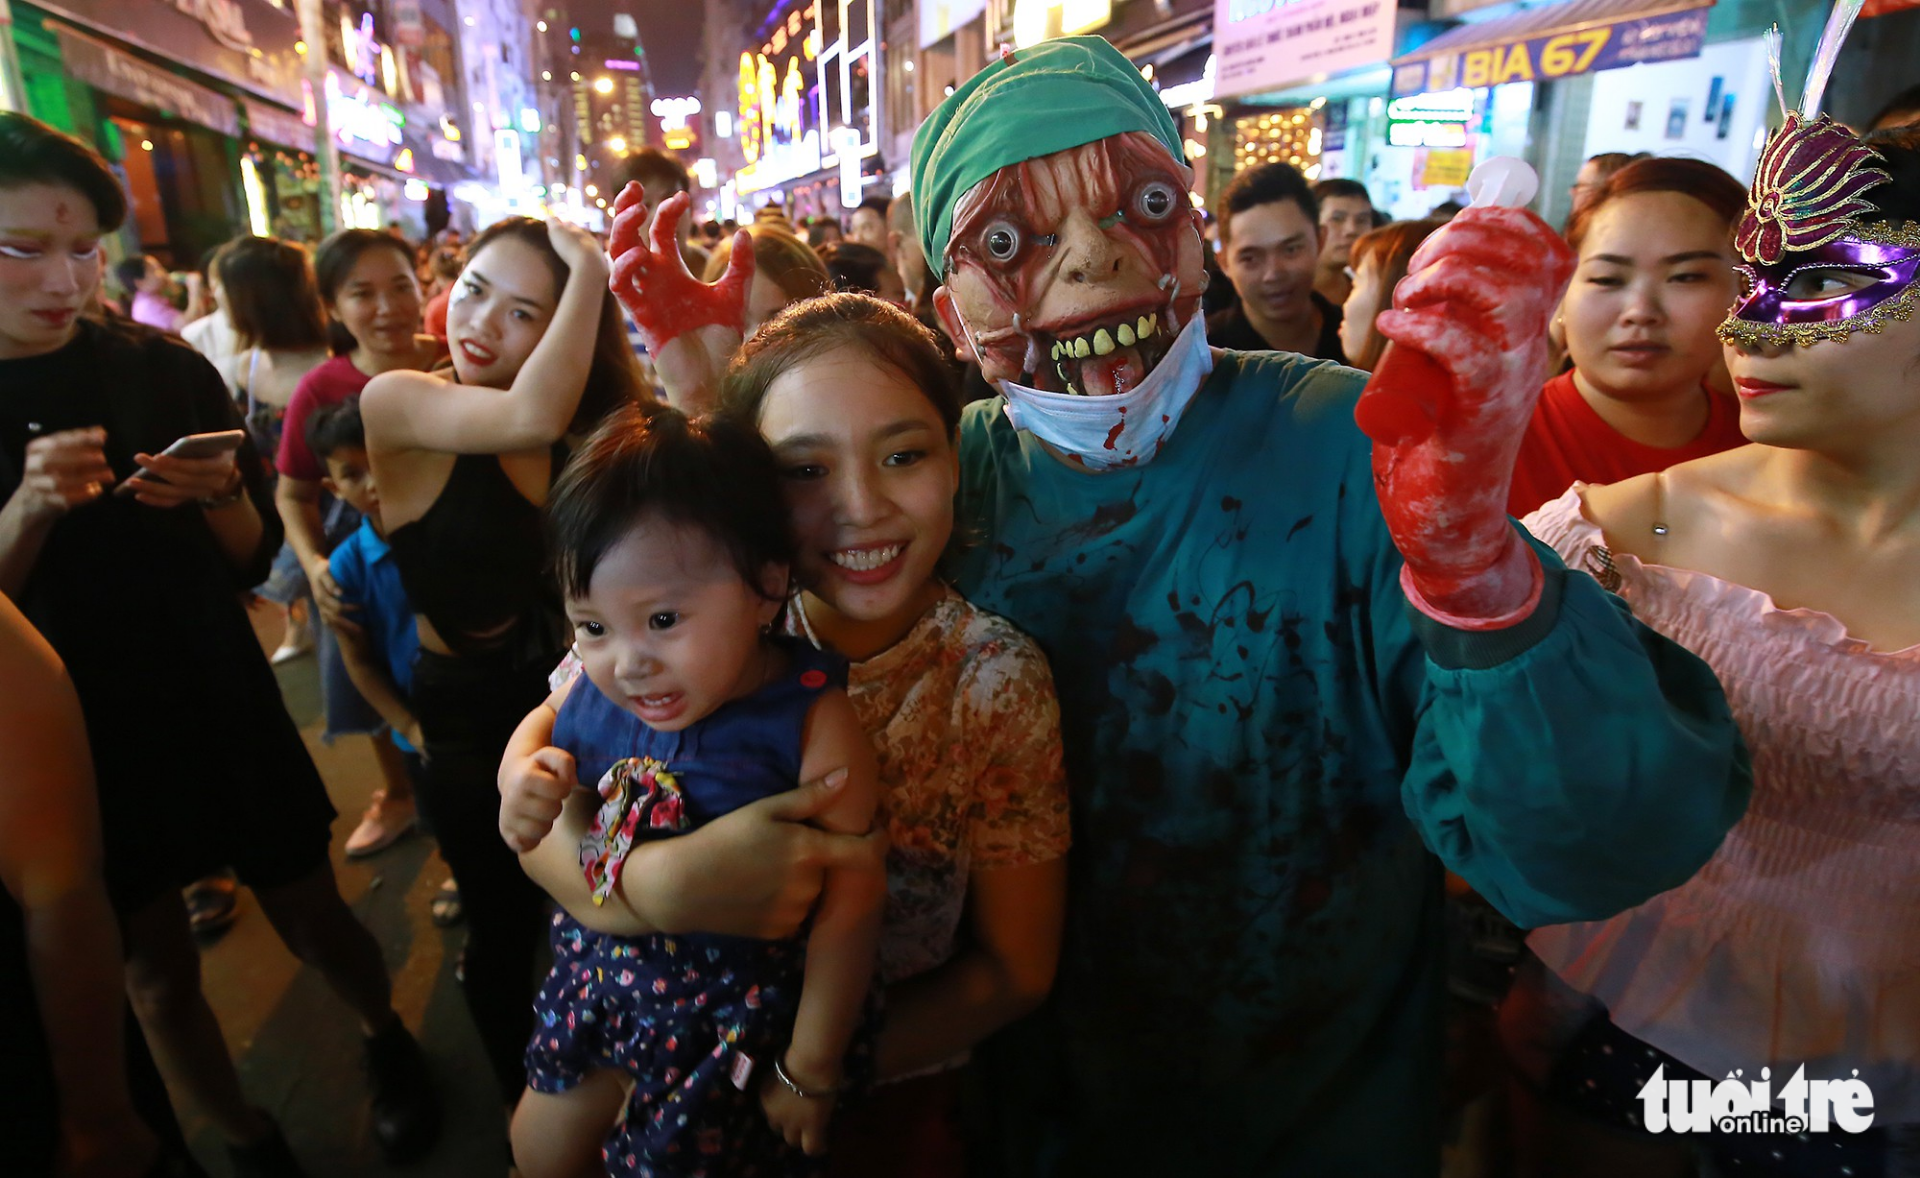 A man dressed up as a mad scientist poses with the crowd on Bui Vien Walking Street.